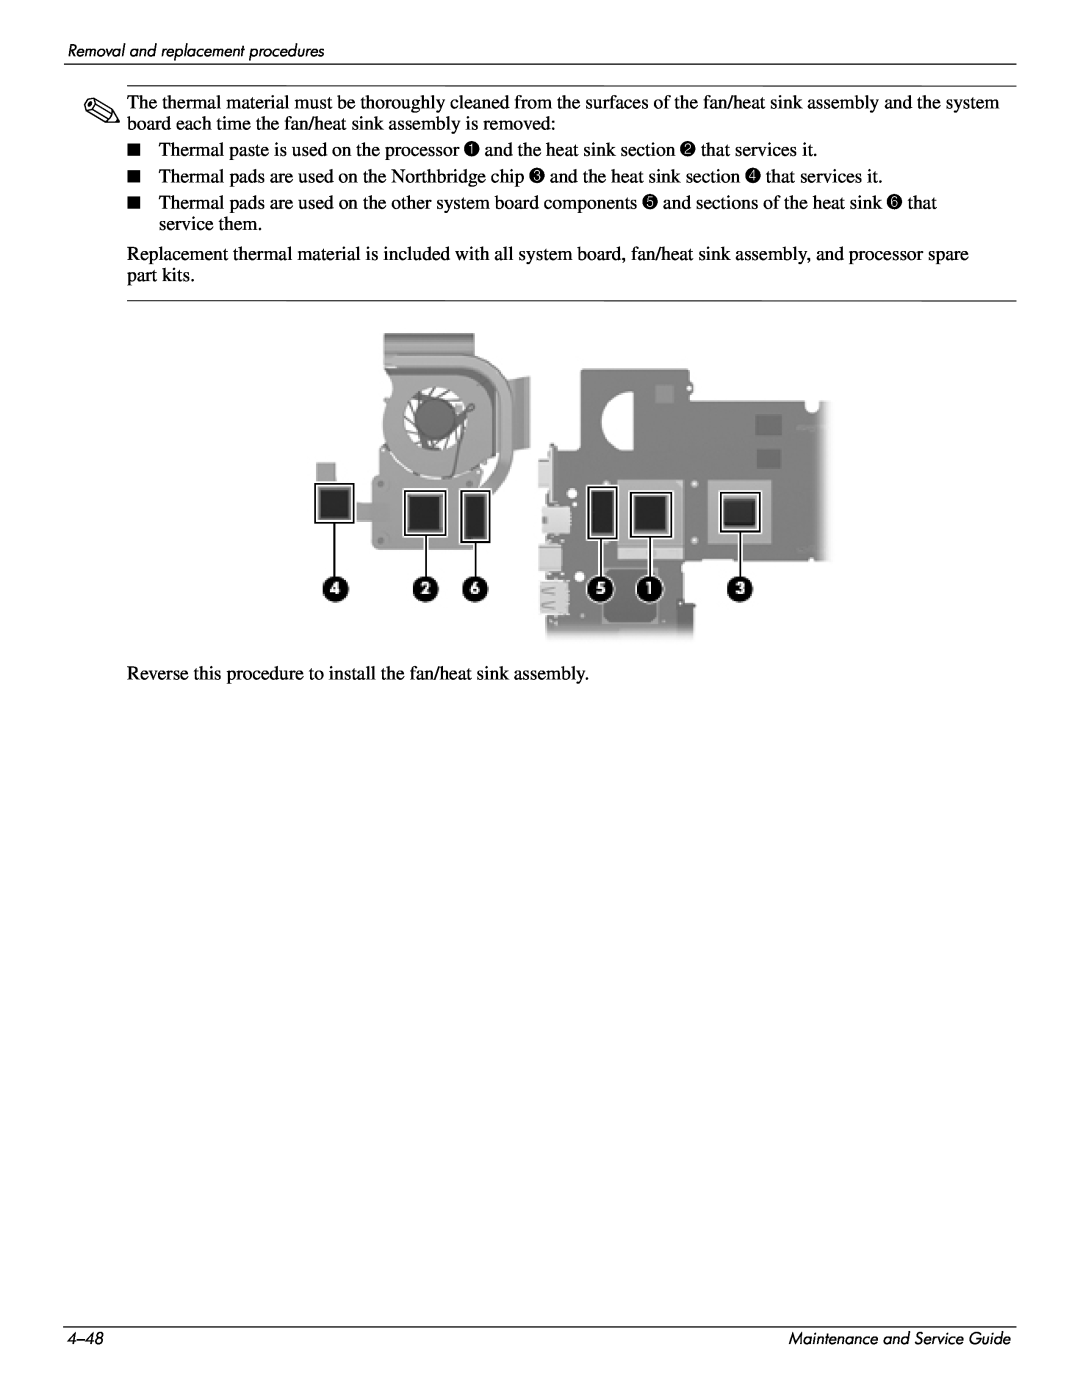 HP CQ35-117TU, CQ35-229TX, CQ35-227TX, CQ35-224TX, CQ35-225TX Reverse this procedure to install the fan/heat sink assembly 